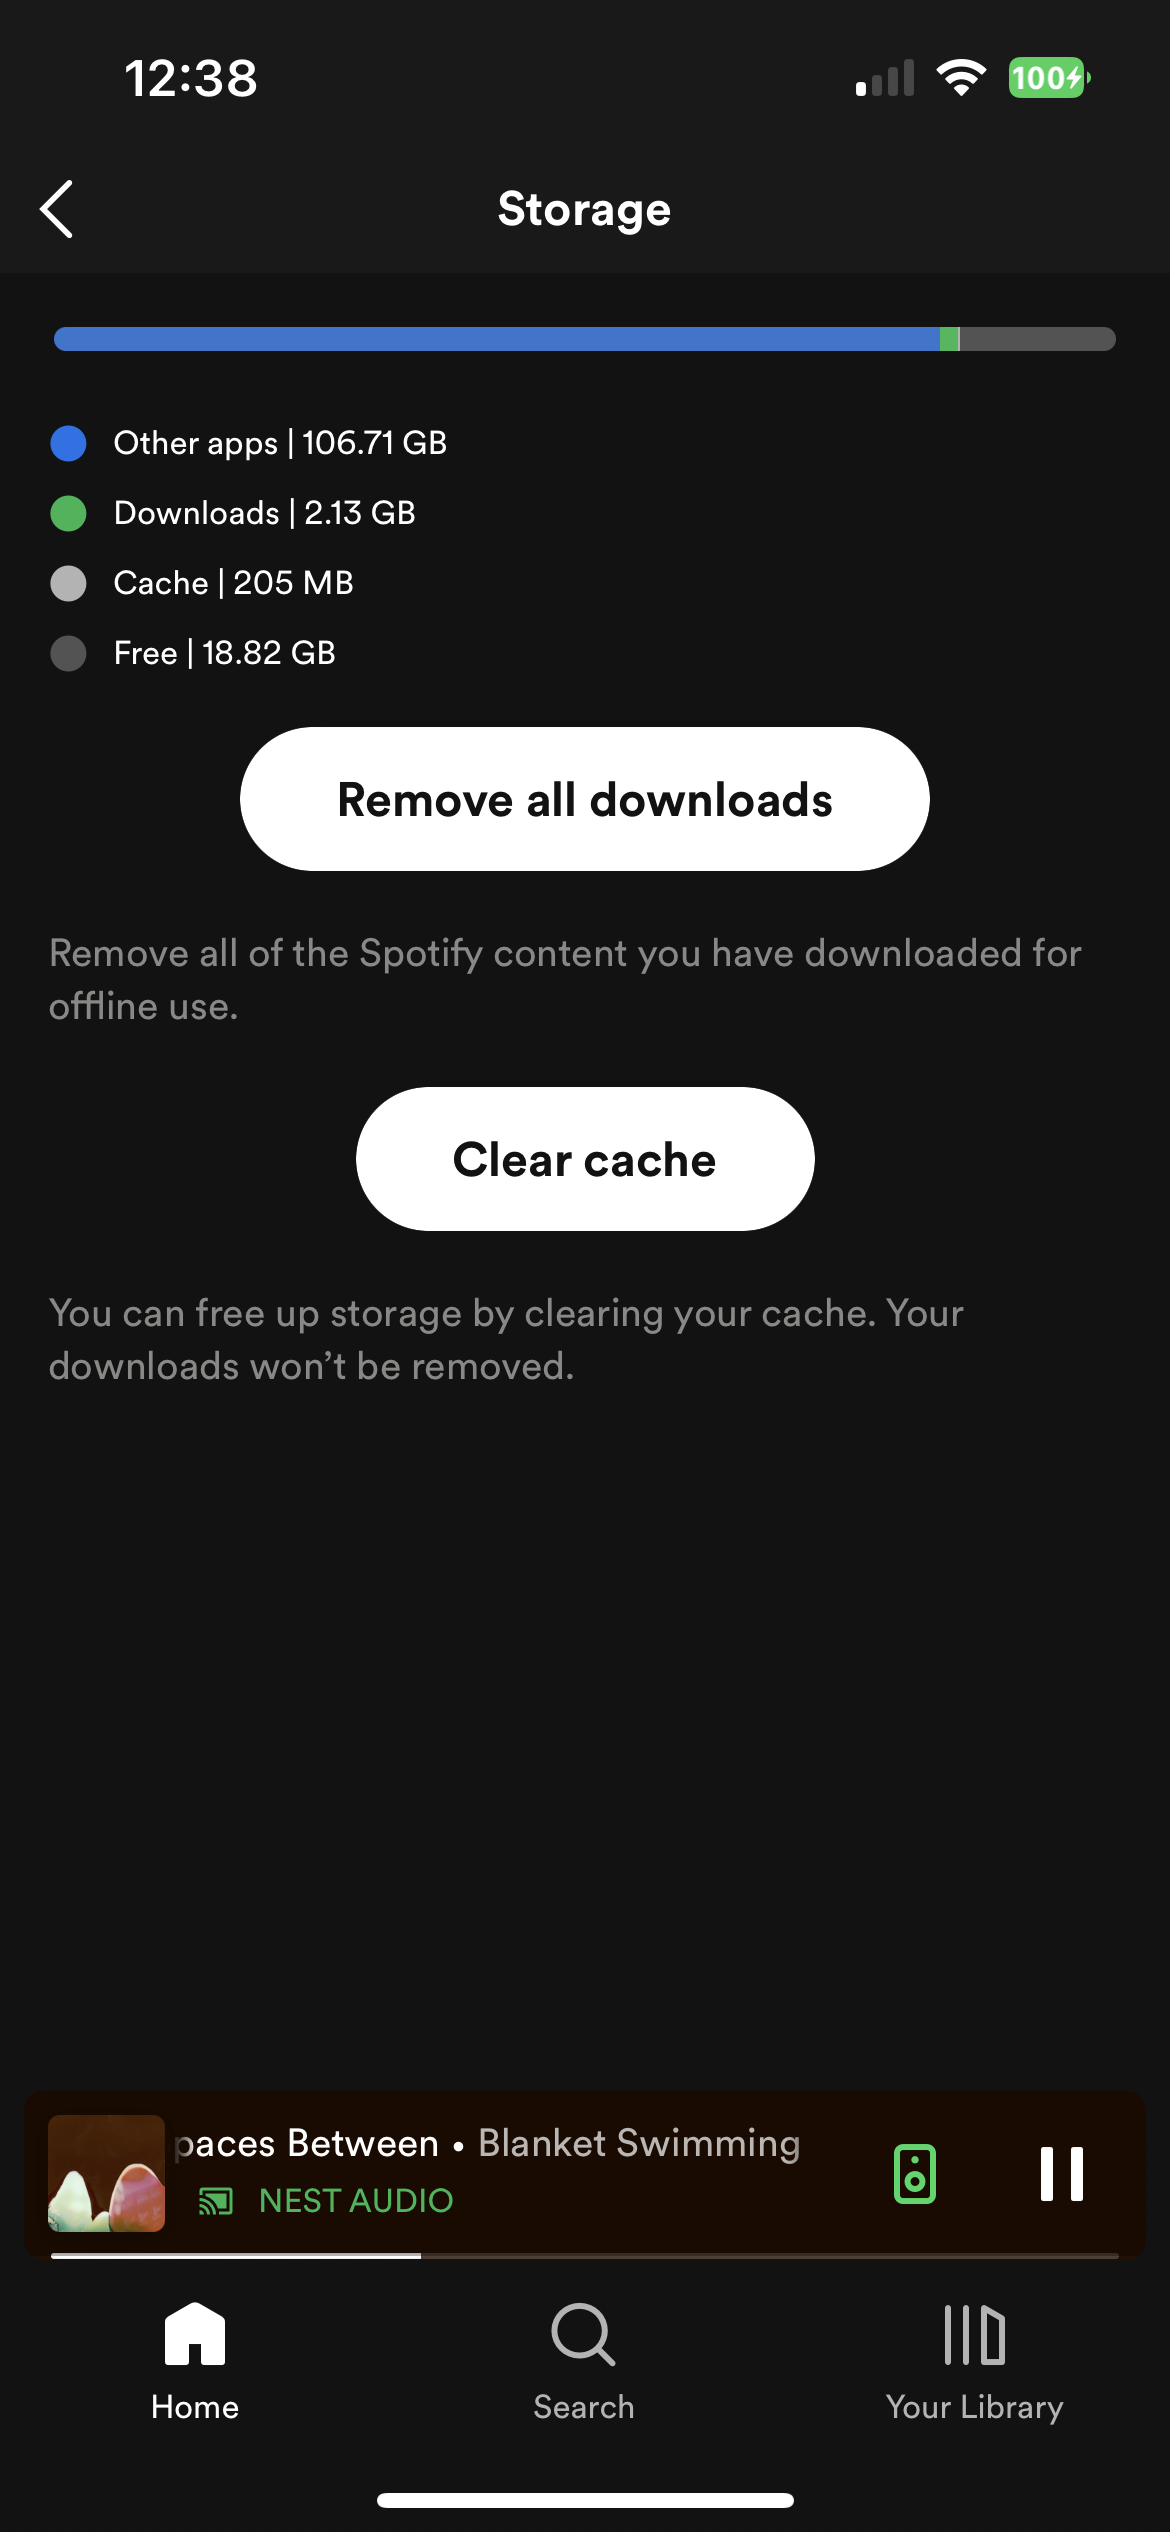 Storage options in the Spotify app